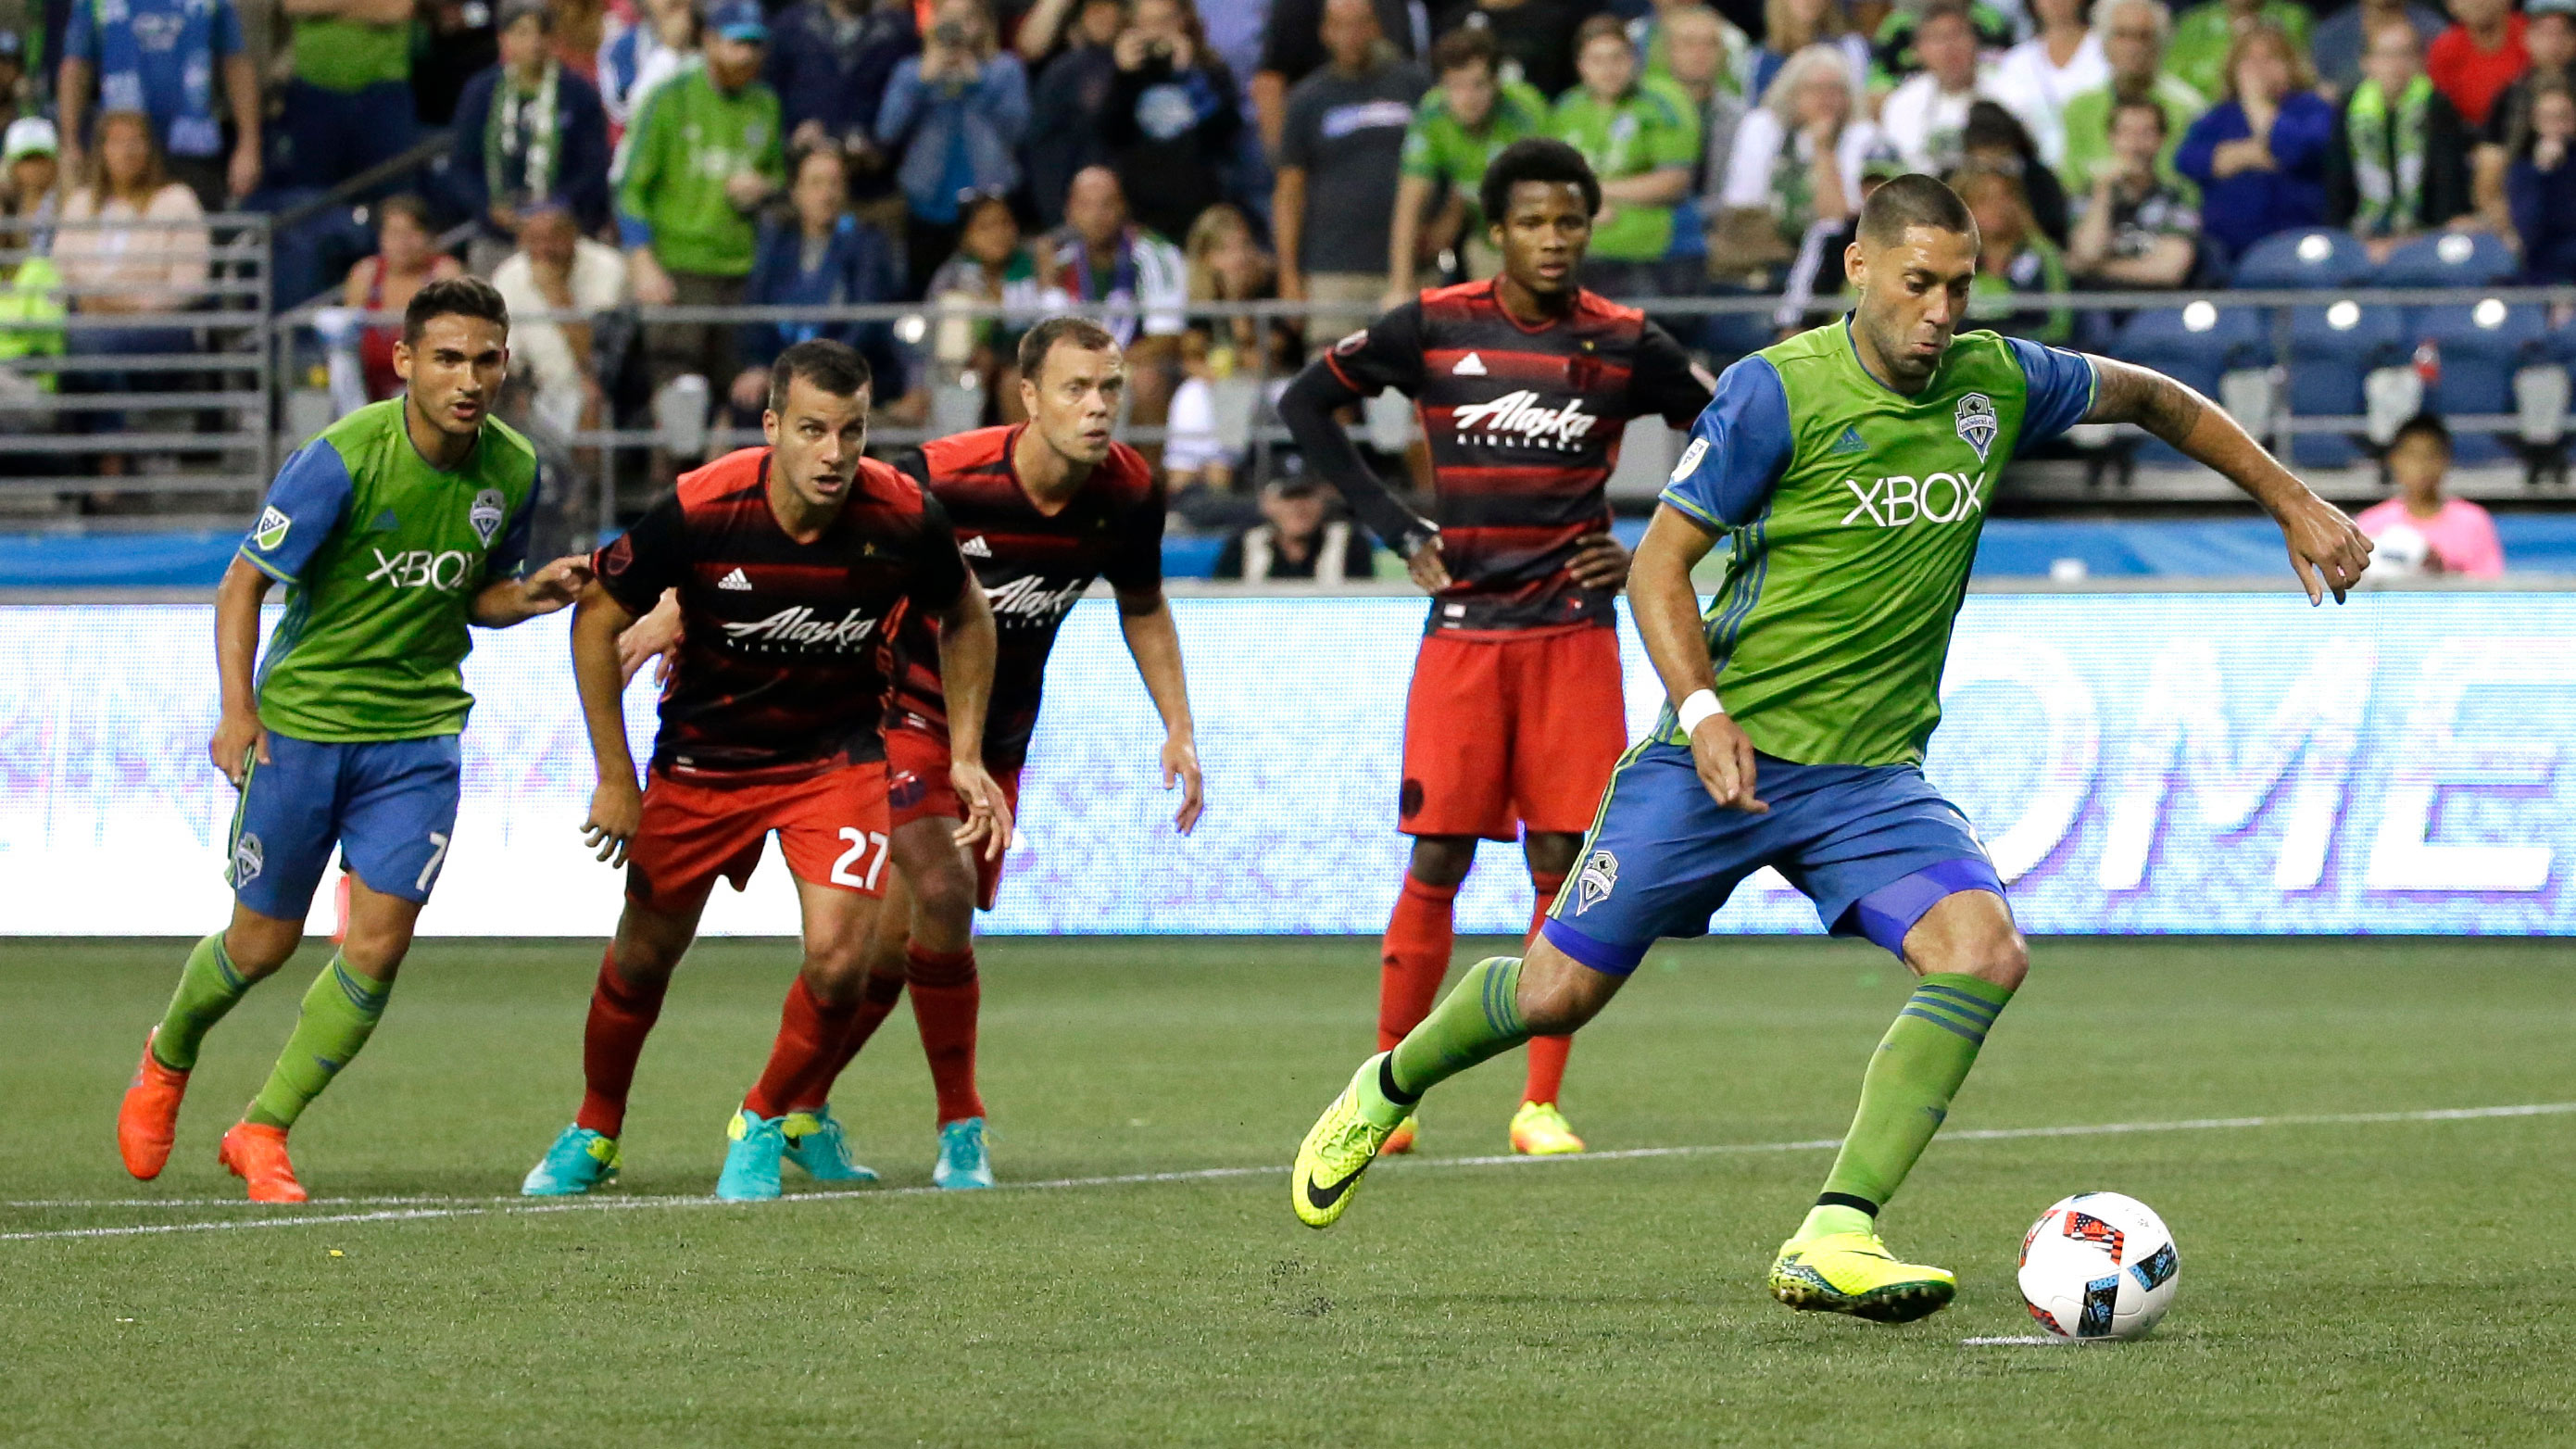 Five Things to Know About Clint Dempsey